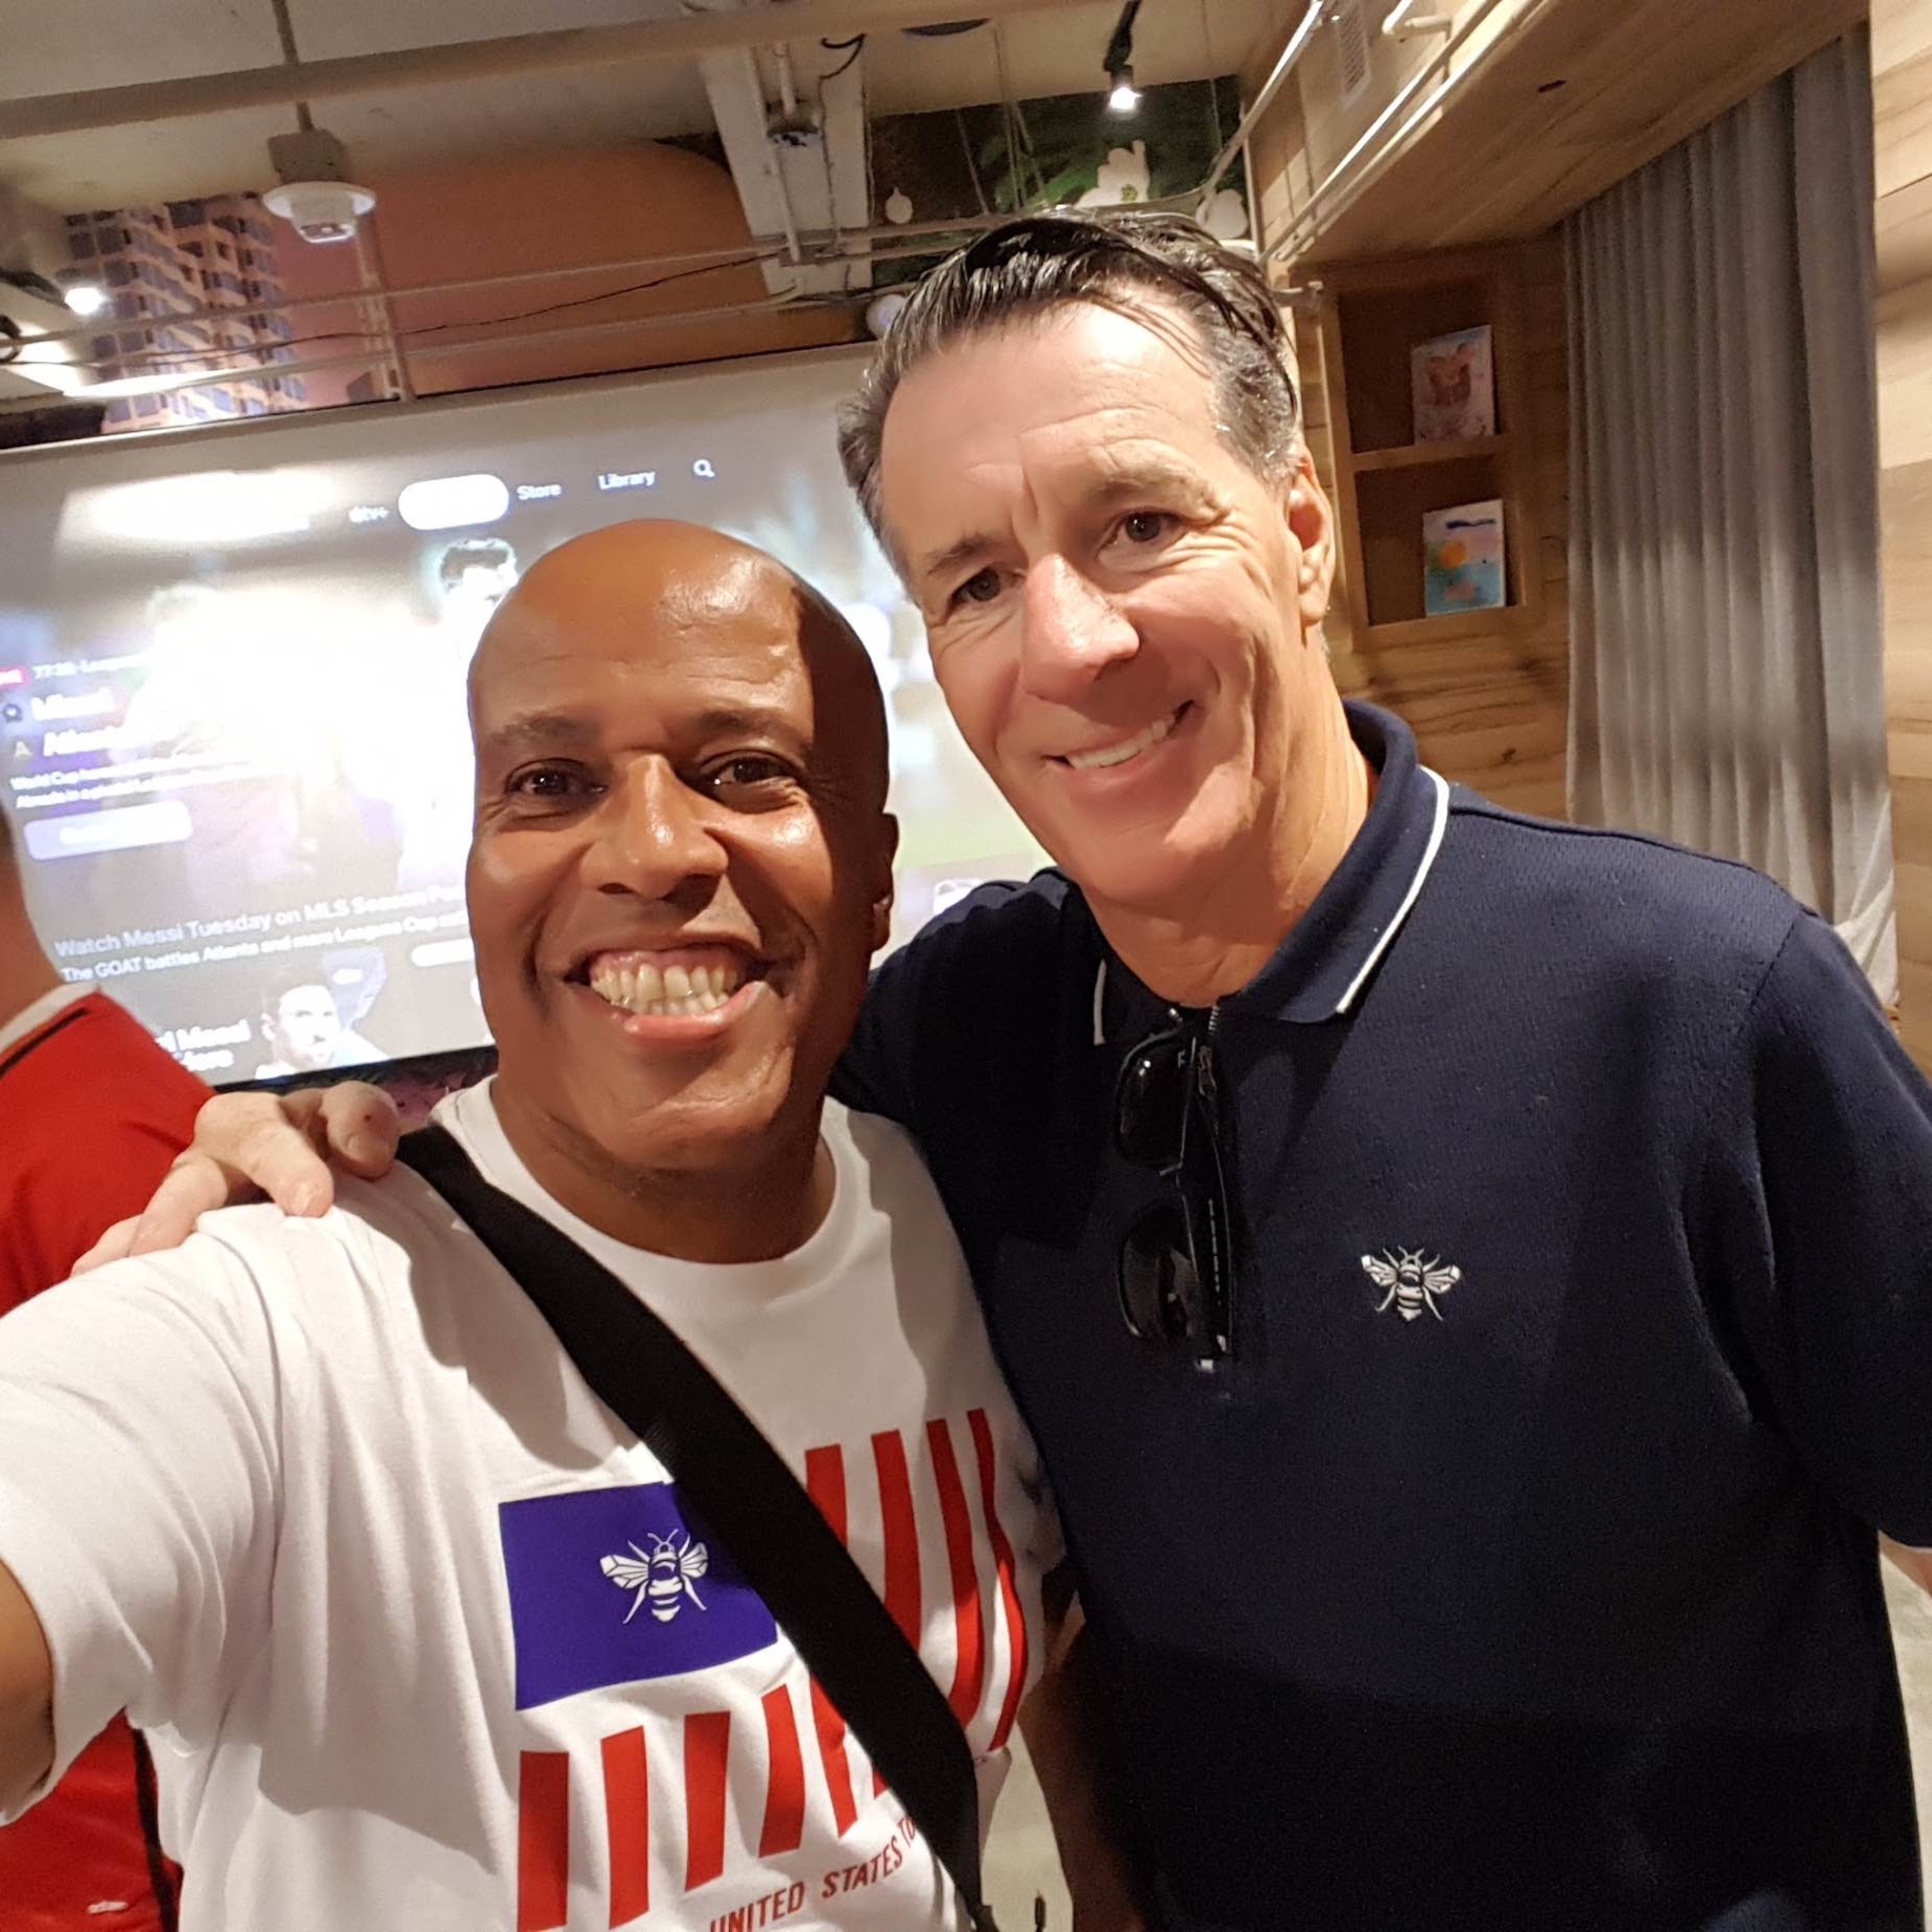 Brentford US Tour: Day 4 - A chat with Brentford Legend Gary Blissett in Atlanta